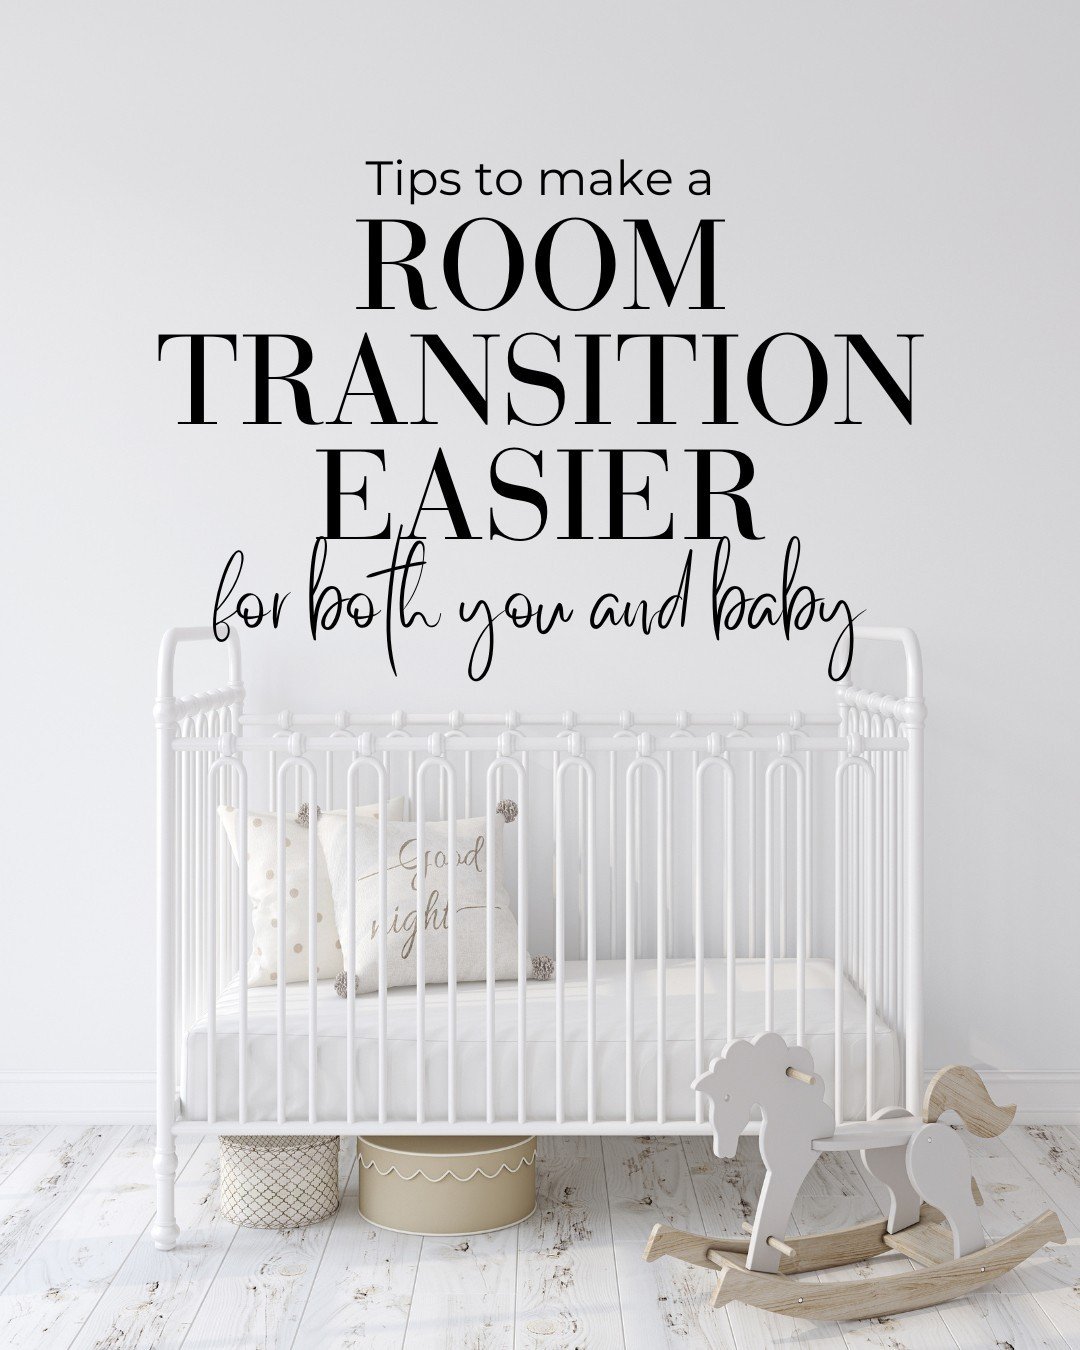 Are you thinking about transitioning your baby from your room to their own sleep space?

We know this change can feel big so we&rsquo;ve put some tips together to make it easier for both you and bub &hearts;

Remember there is no rush to do this so o